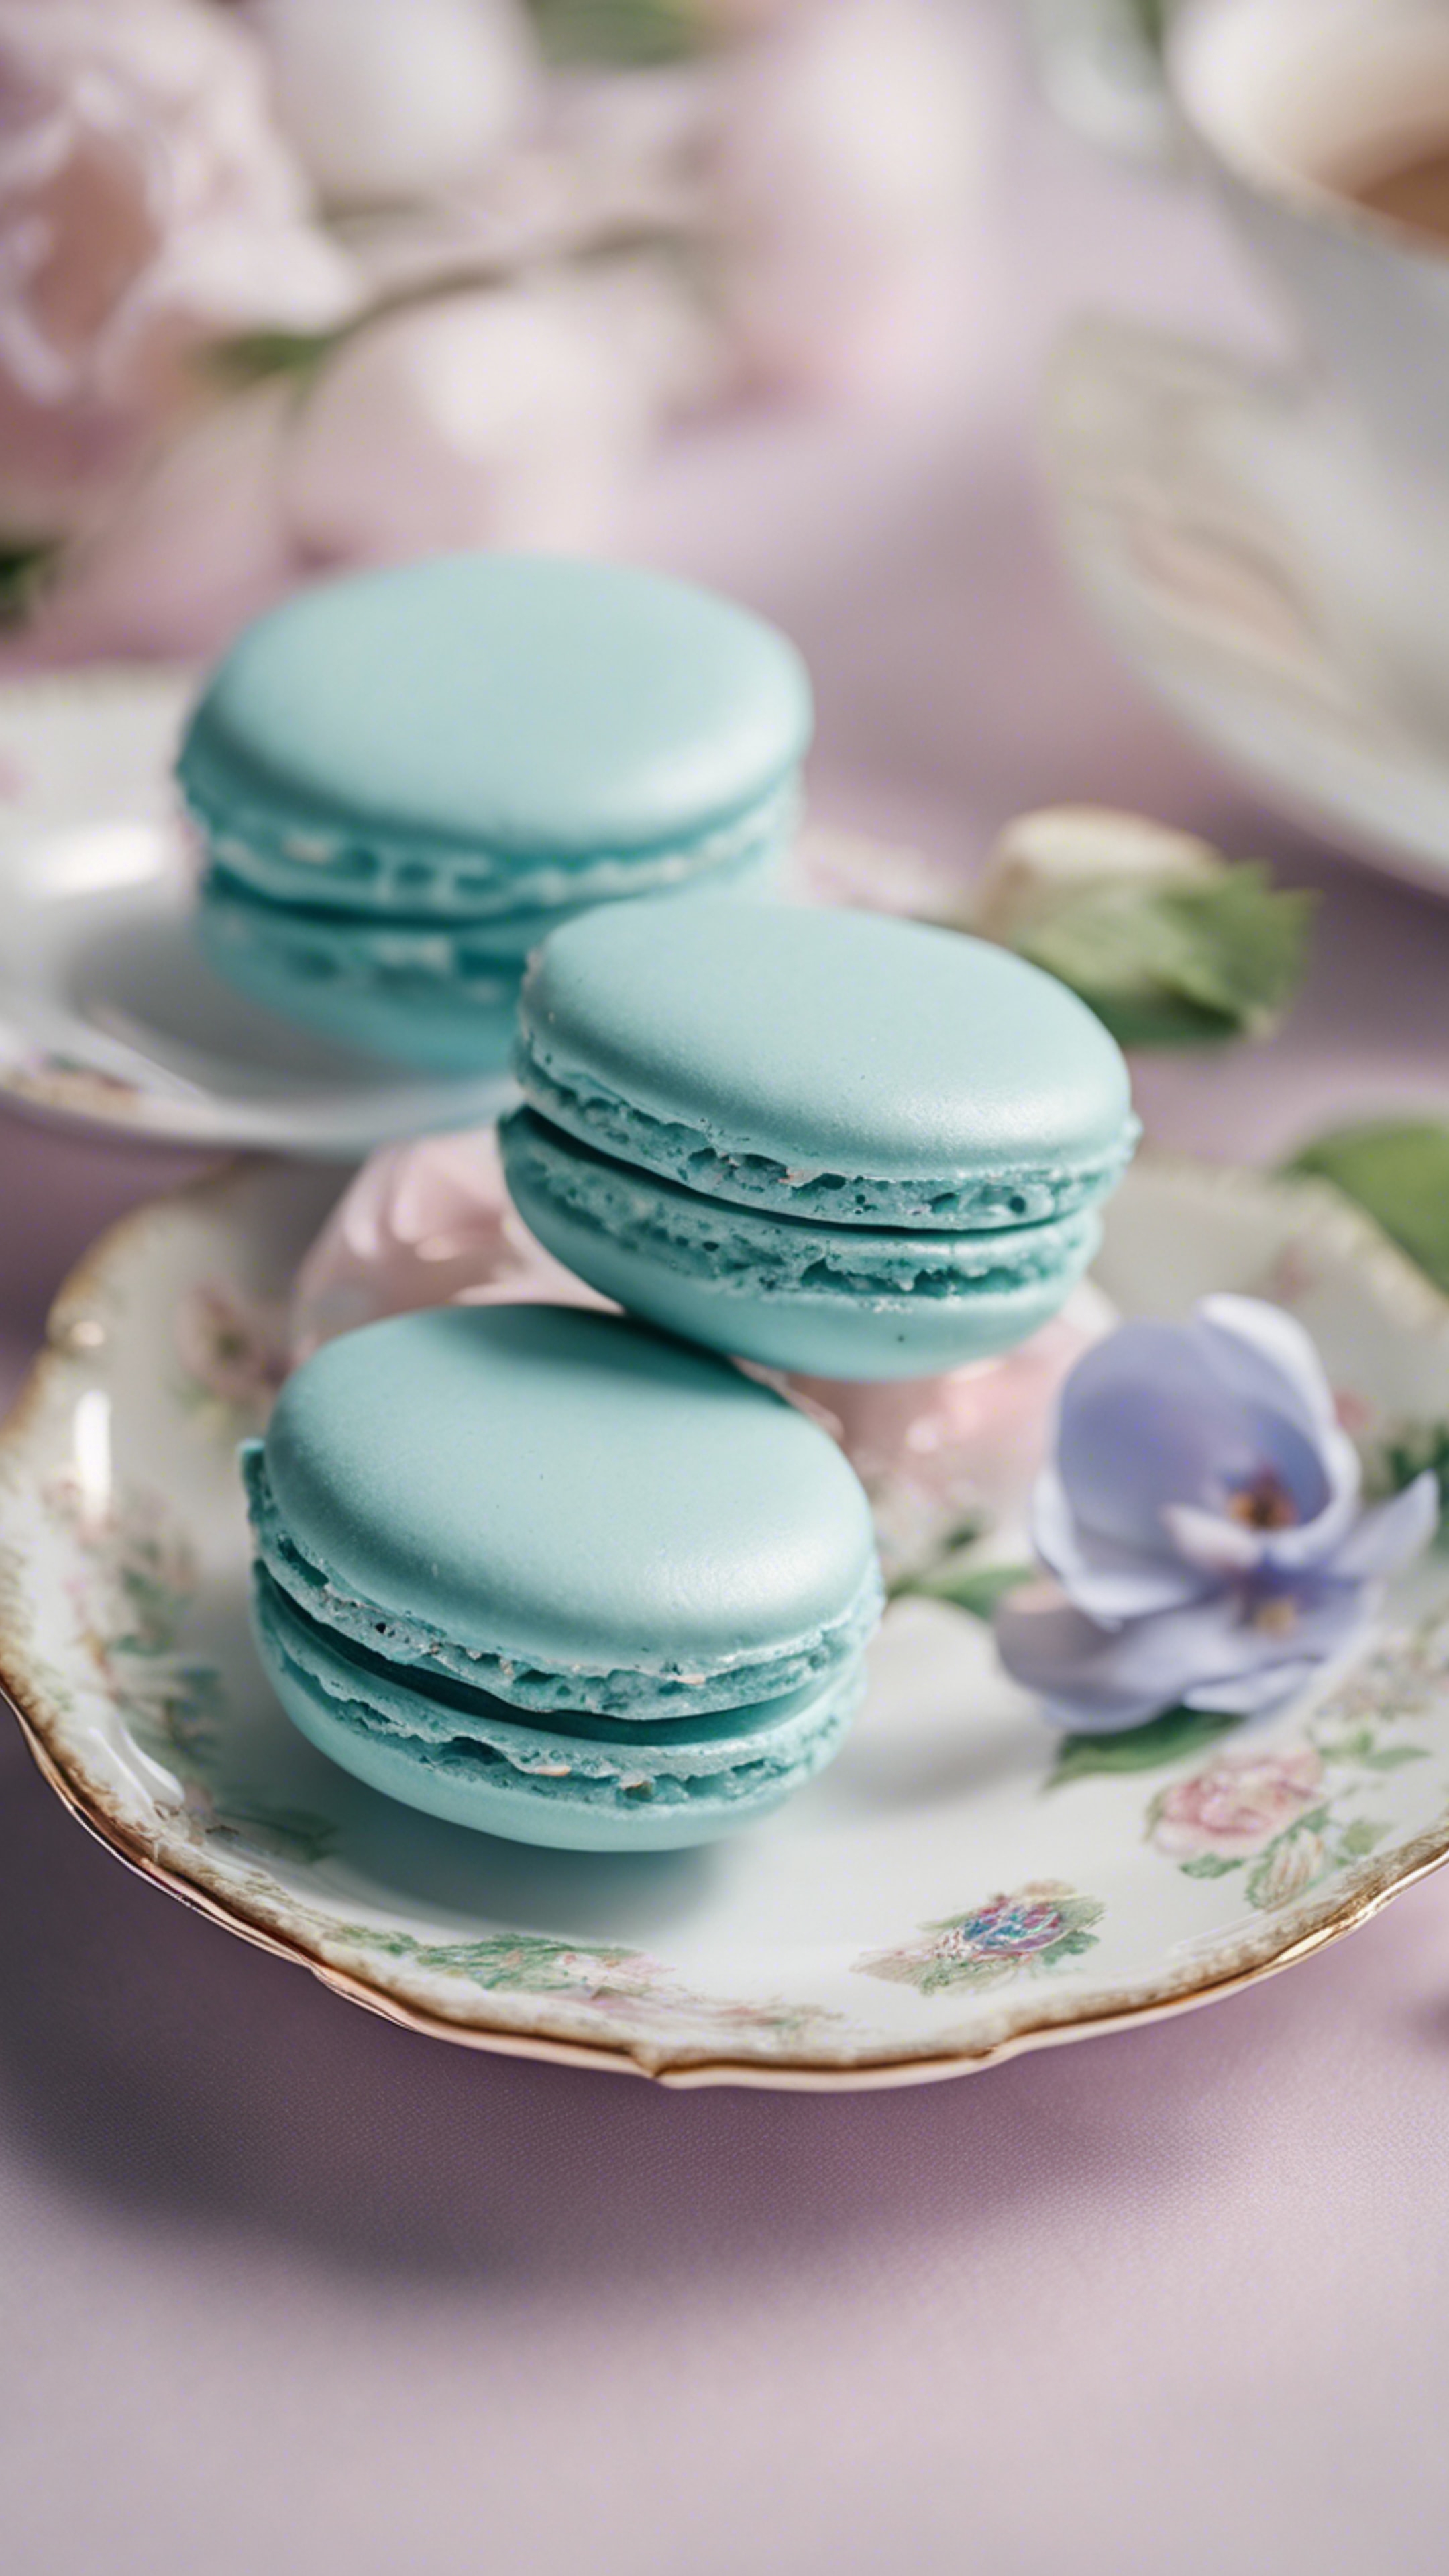 A pair of pastel blue French macarons on a dainty floral china plate. 墙纸[cc240826fa4e4ee284e3]